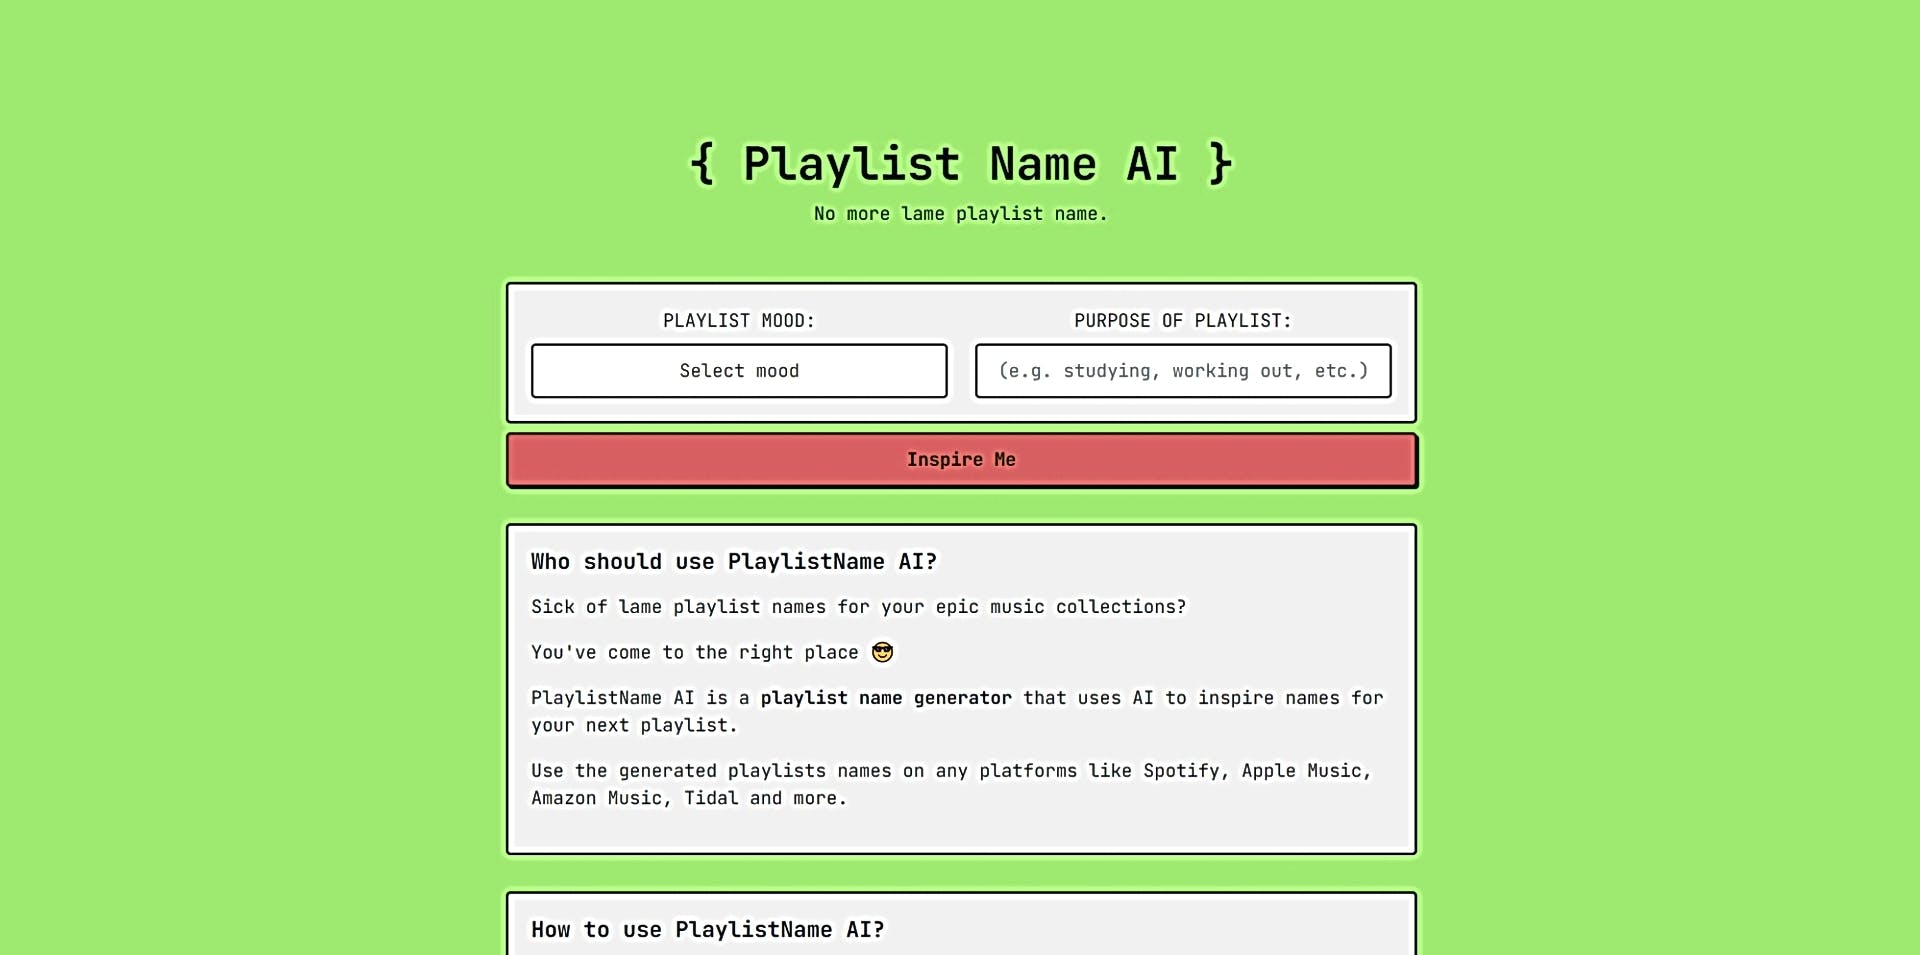 PlaylistName AI featured